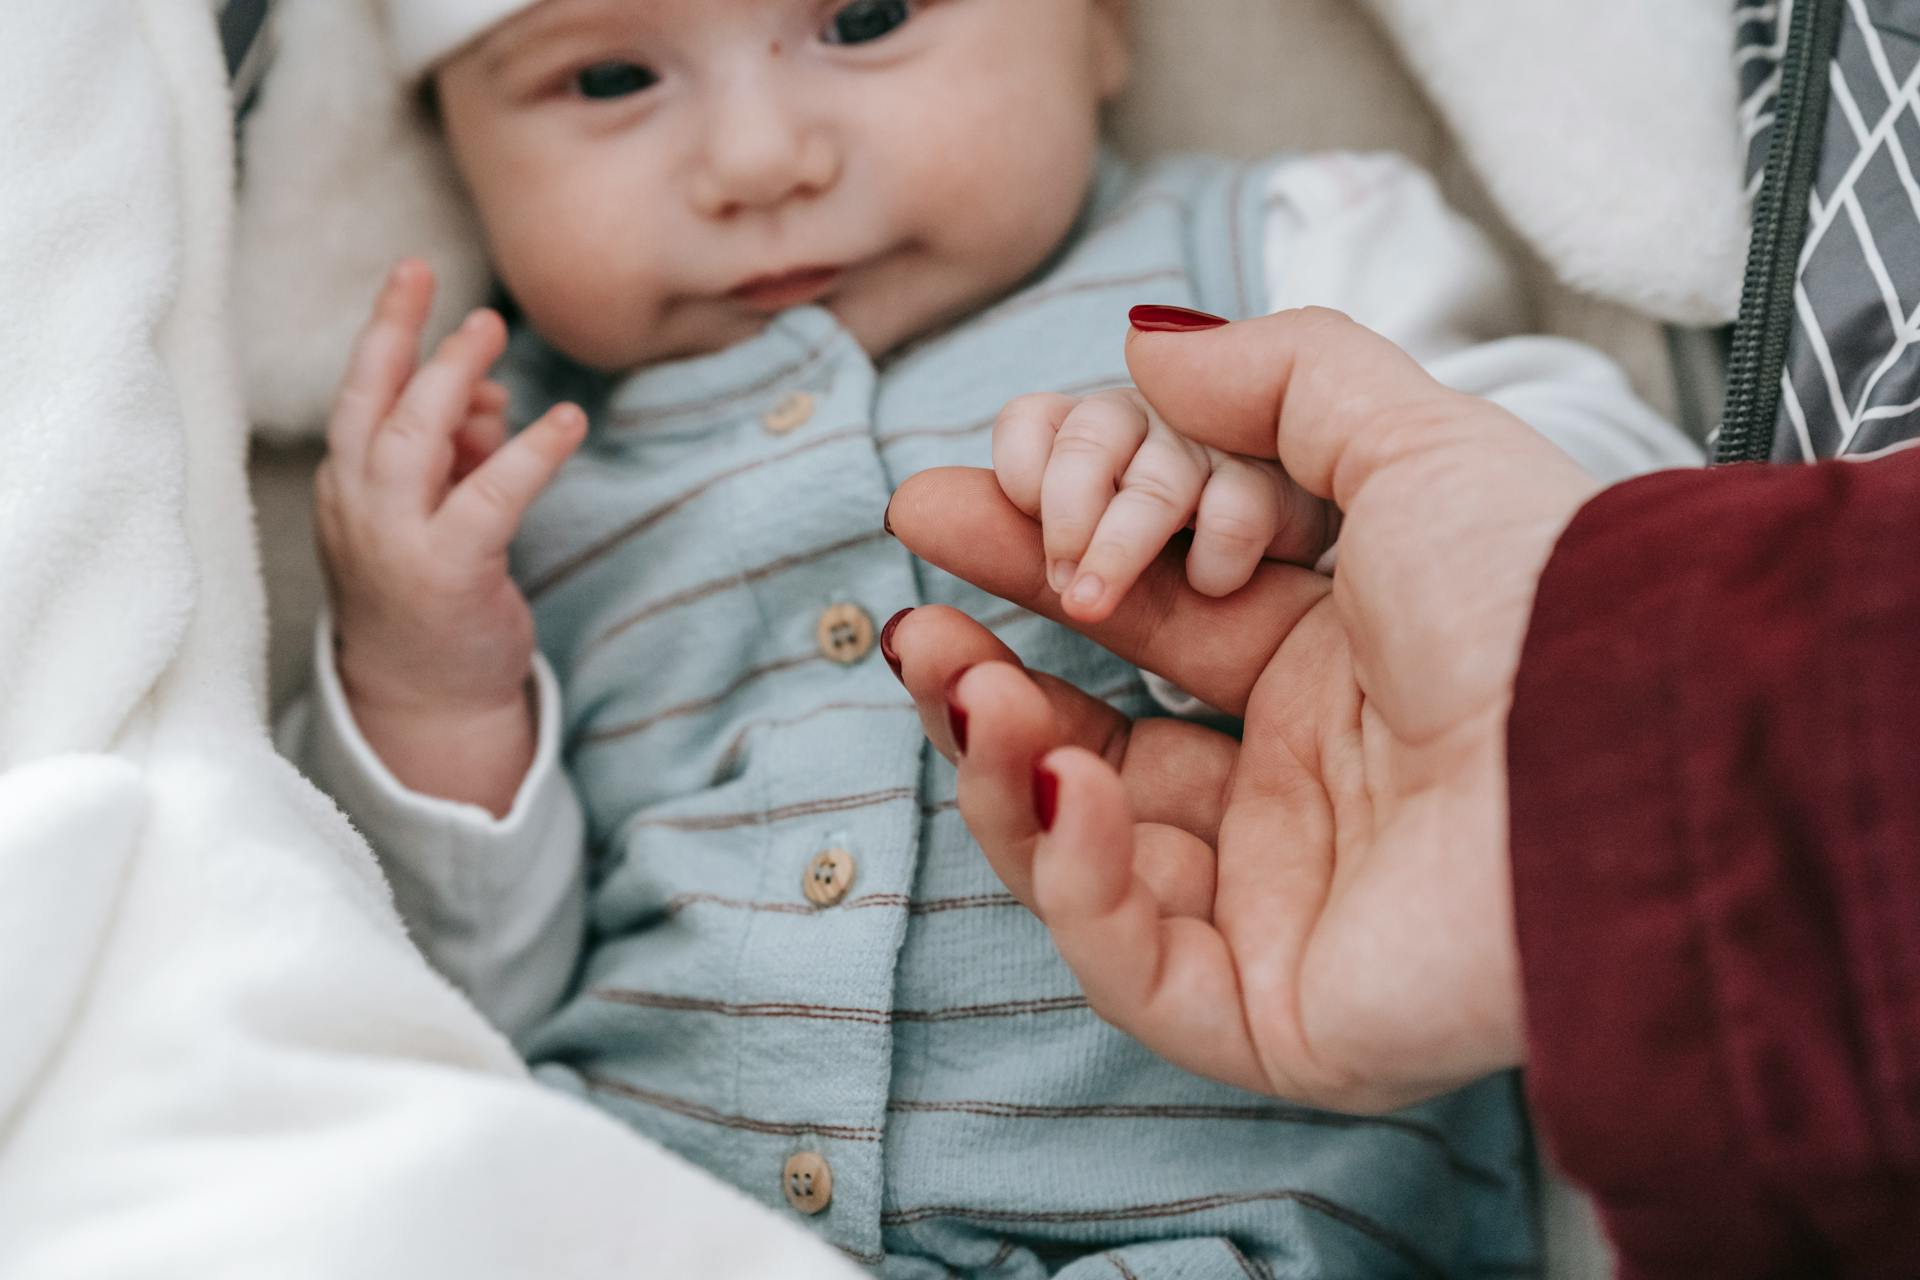 A cute baby holding his mother's hand | Source: Pexels